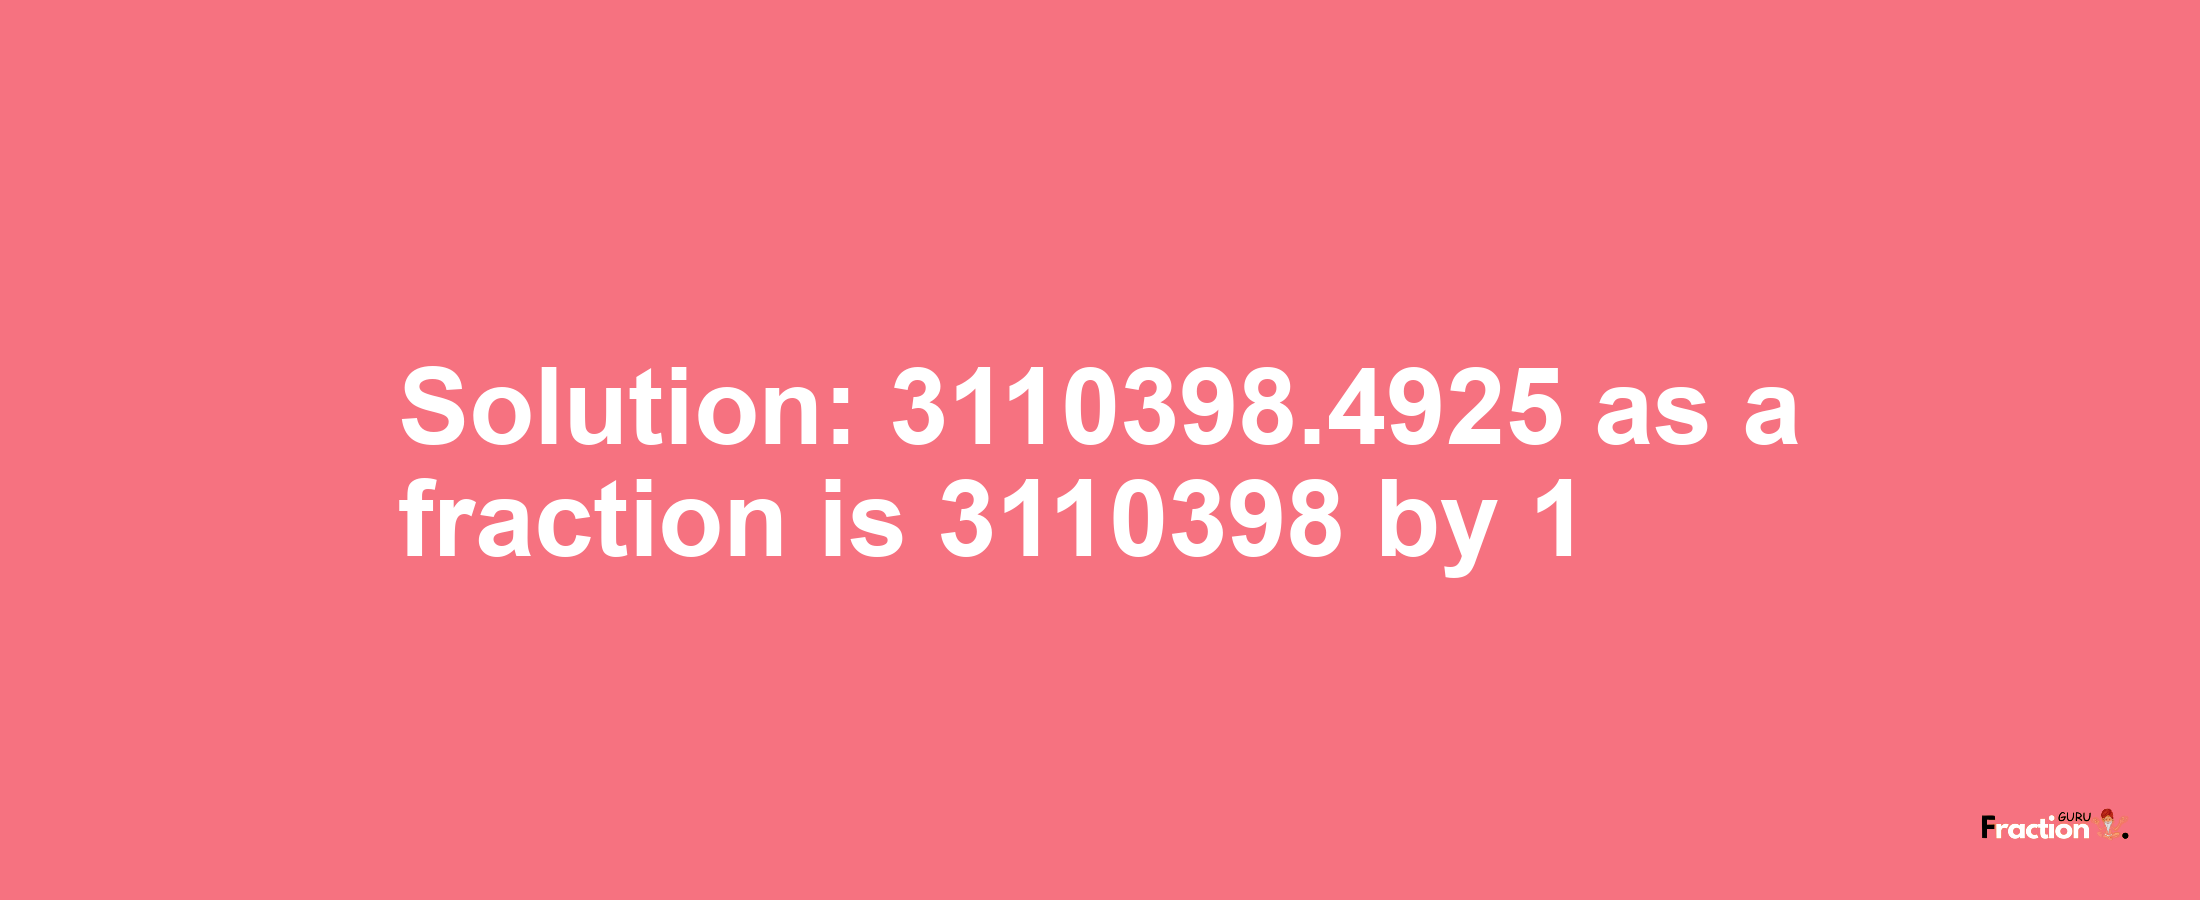 Solution:3110398.4925 as a fraction is 3110398/1